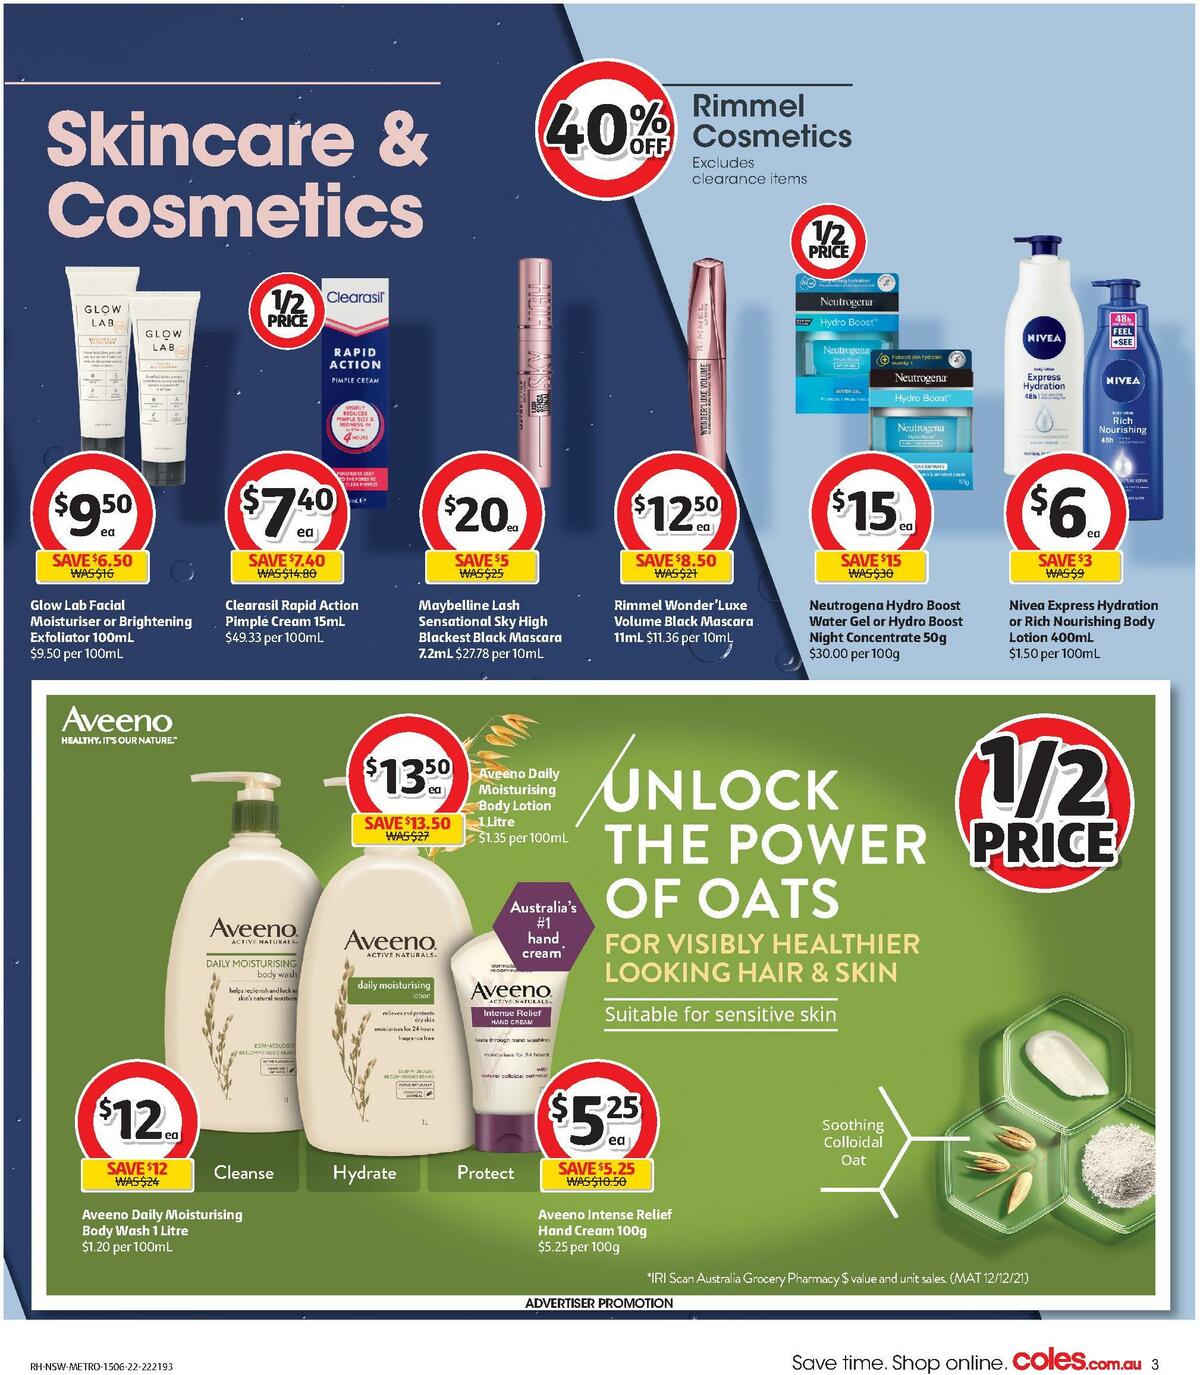 Coles Health & Beauty Catalogues from 15 June